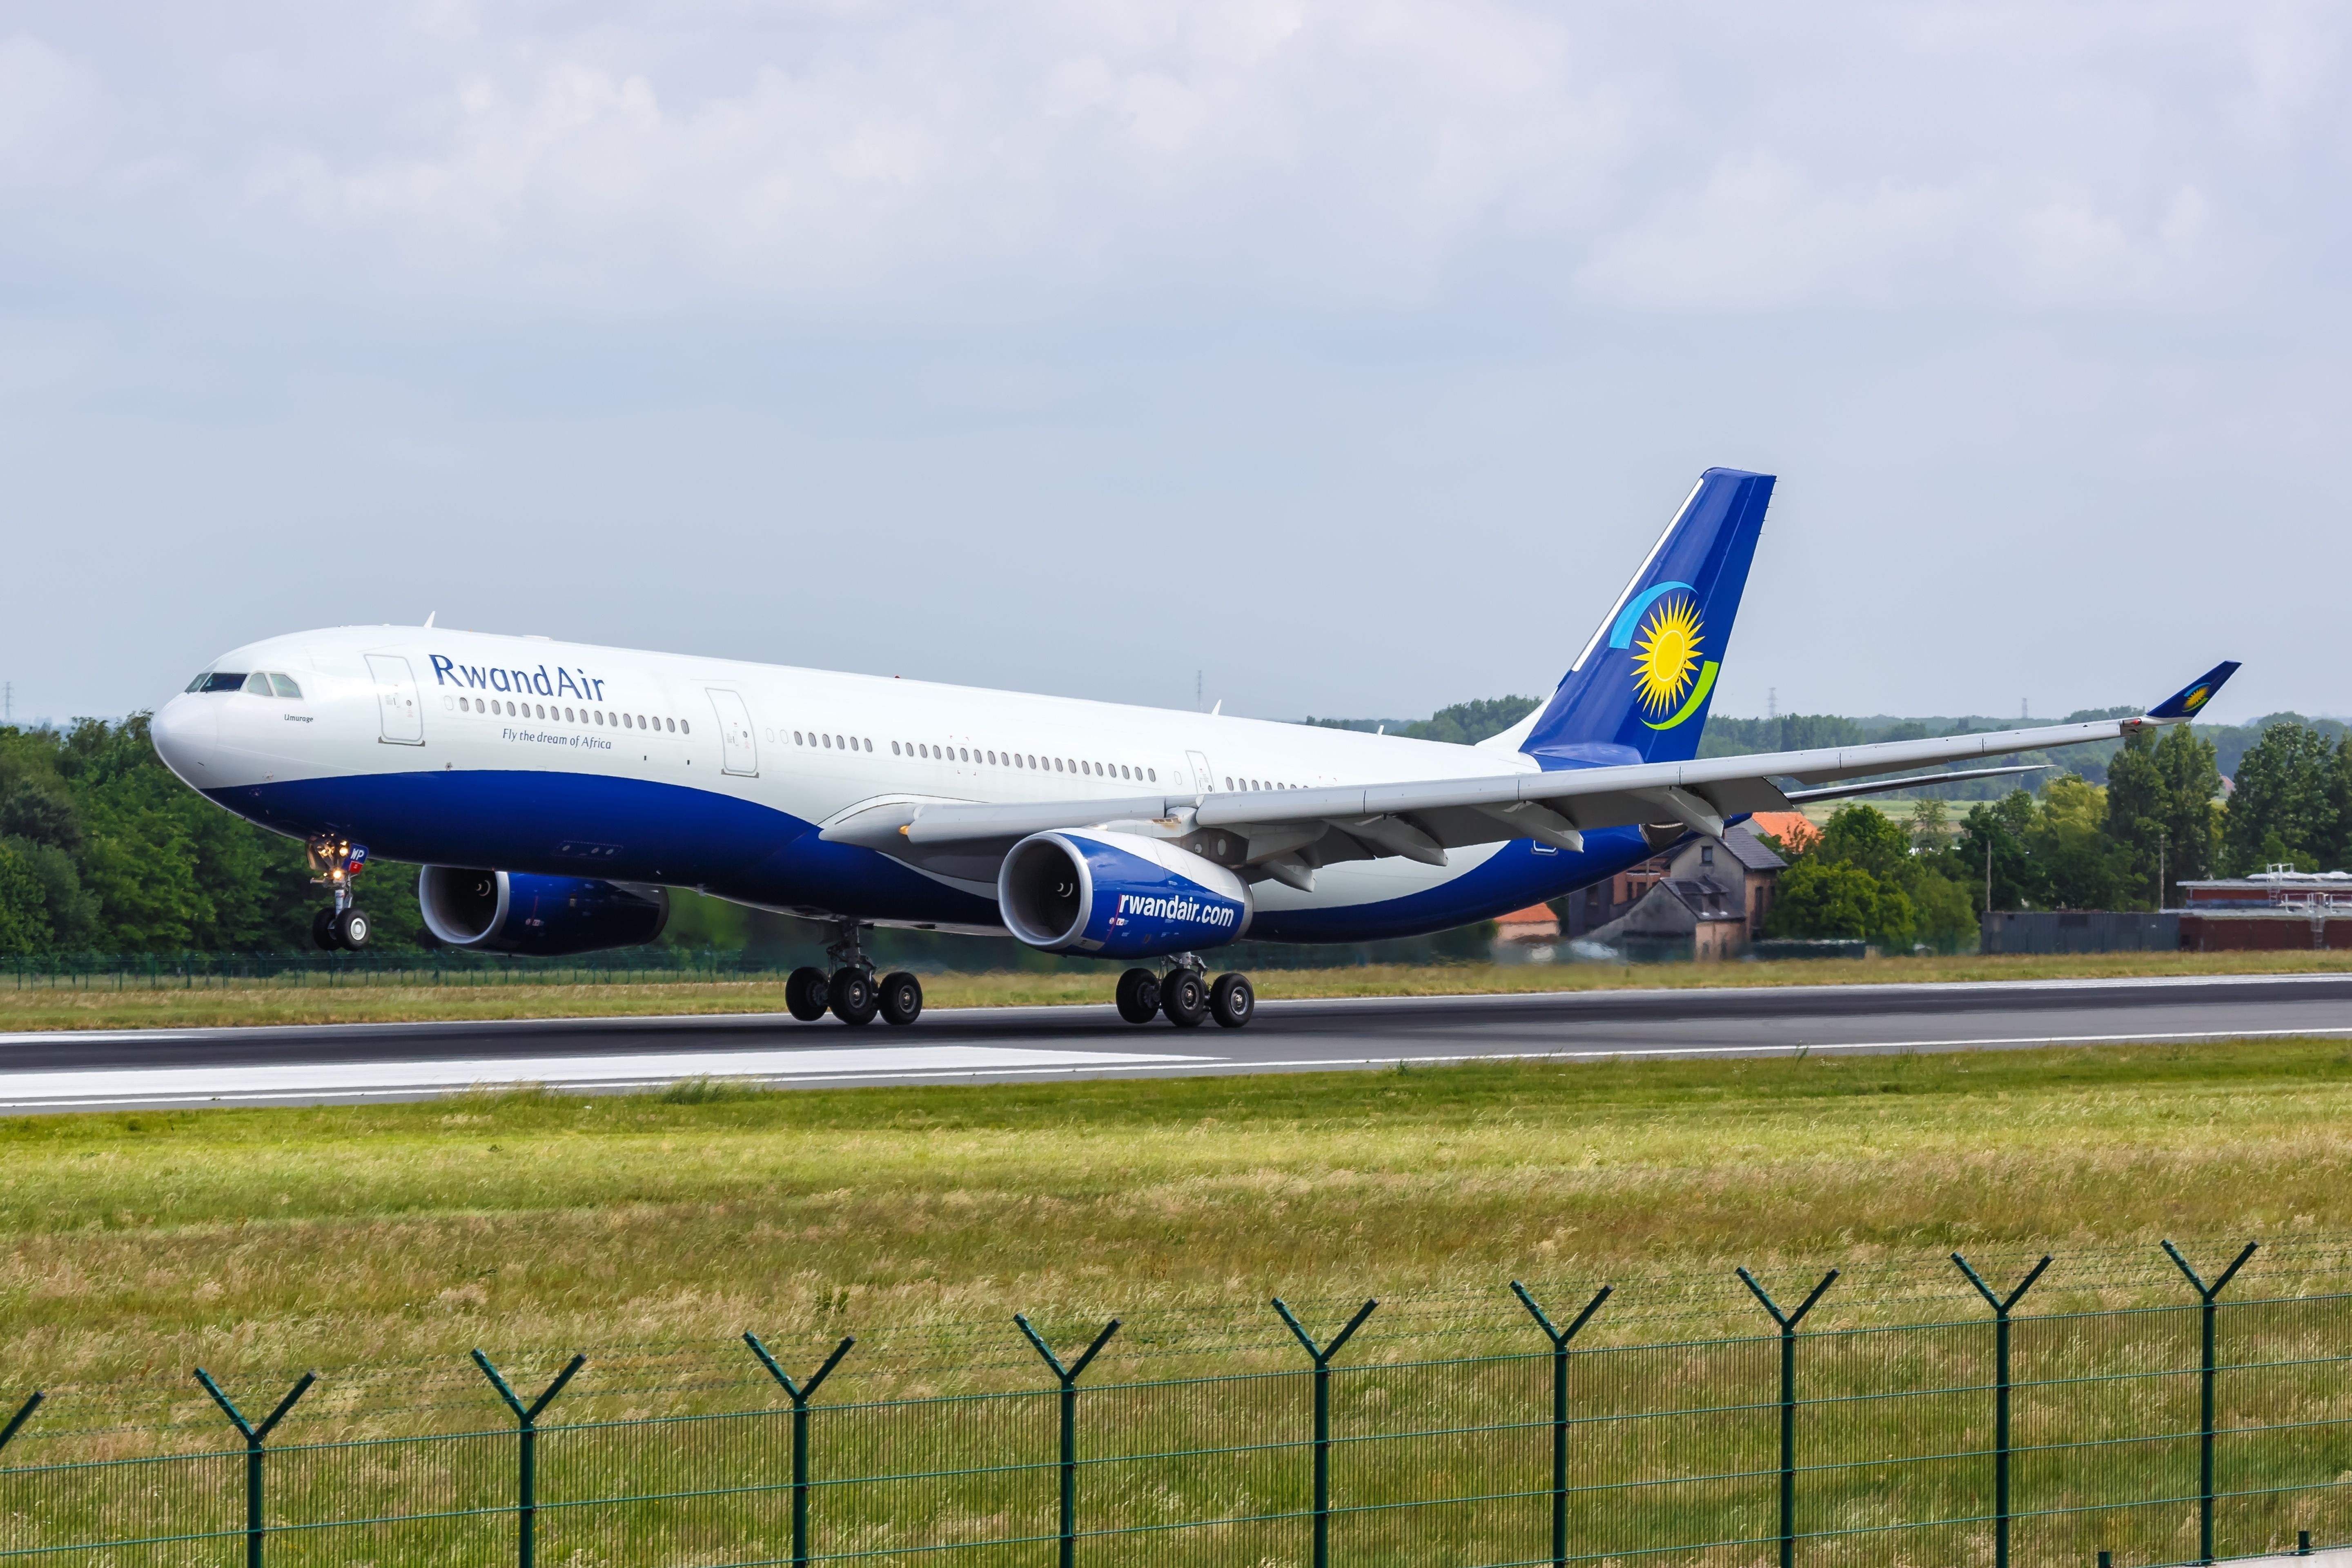 RwandaAir Airbus A330-300 taking off from Brussels Airport